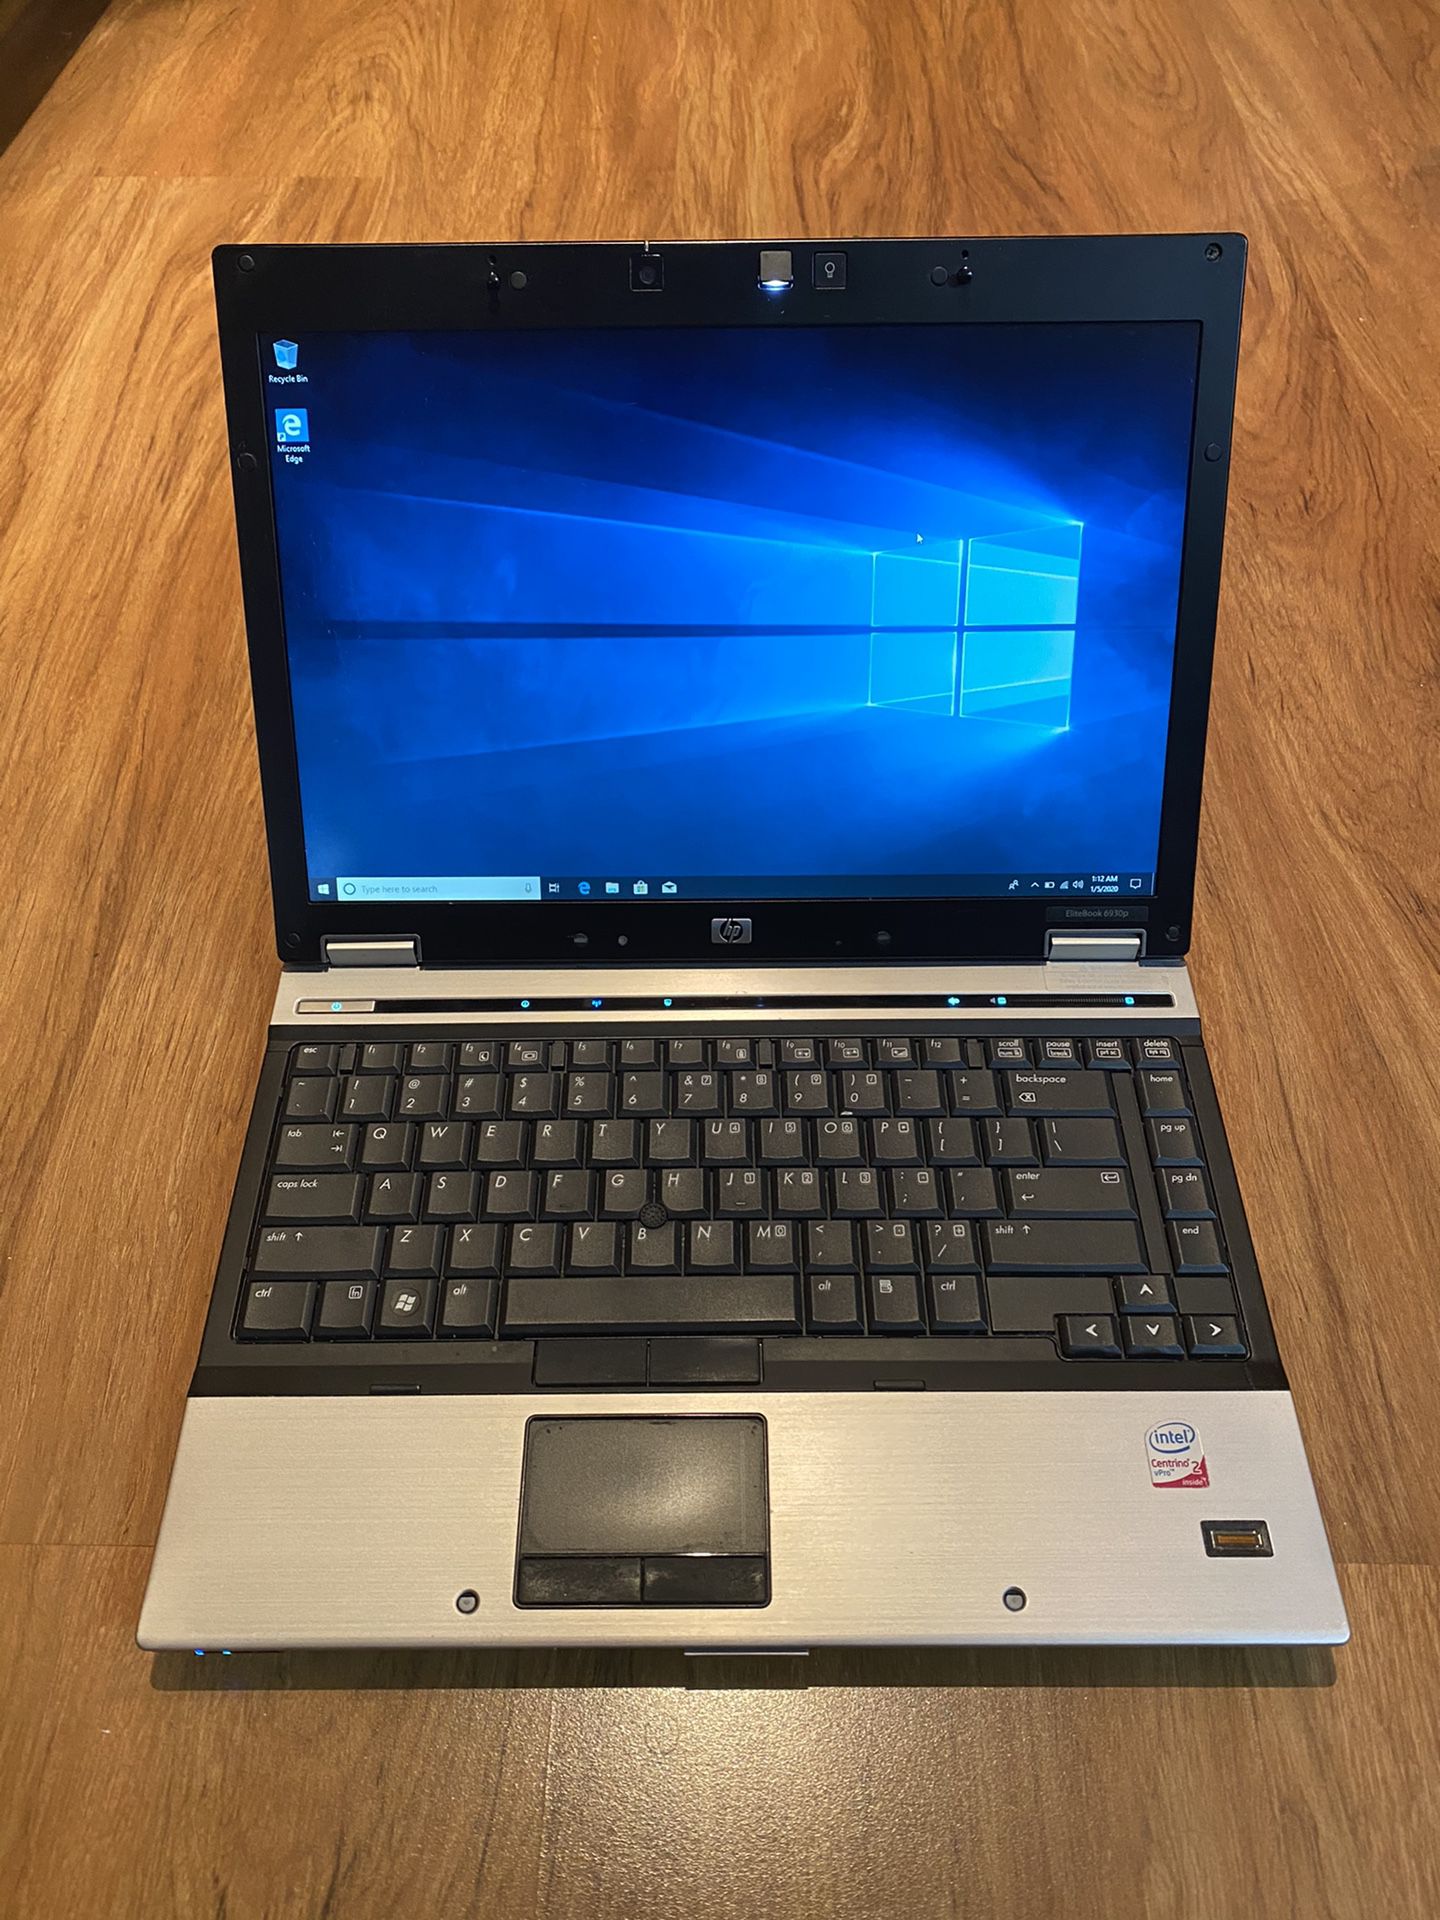 HP EliteBook 6930p 4GB Ram 160GB Hard Drive 14.1 inch Screen Windows 10 Pro Laptop with charger in Excellent Working condition!!!!!